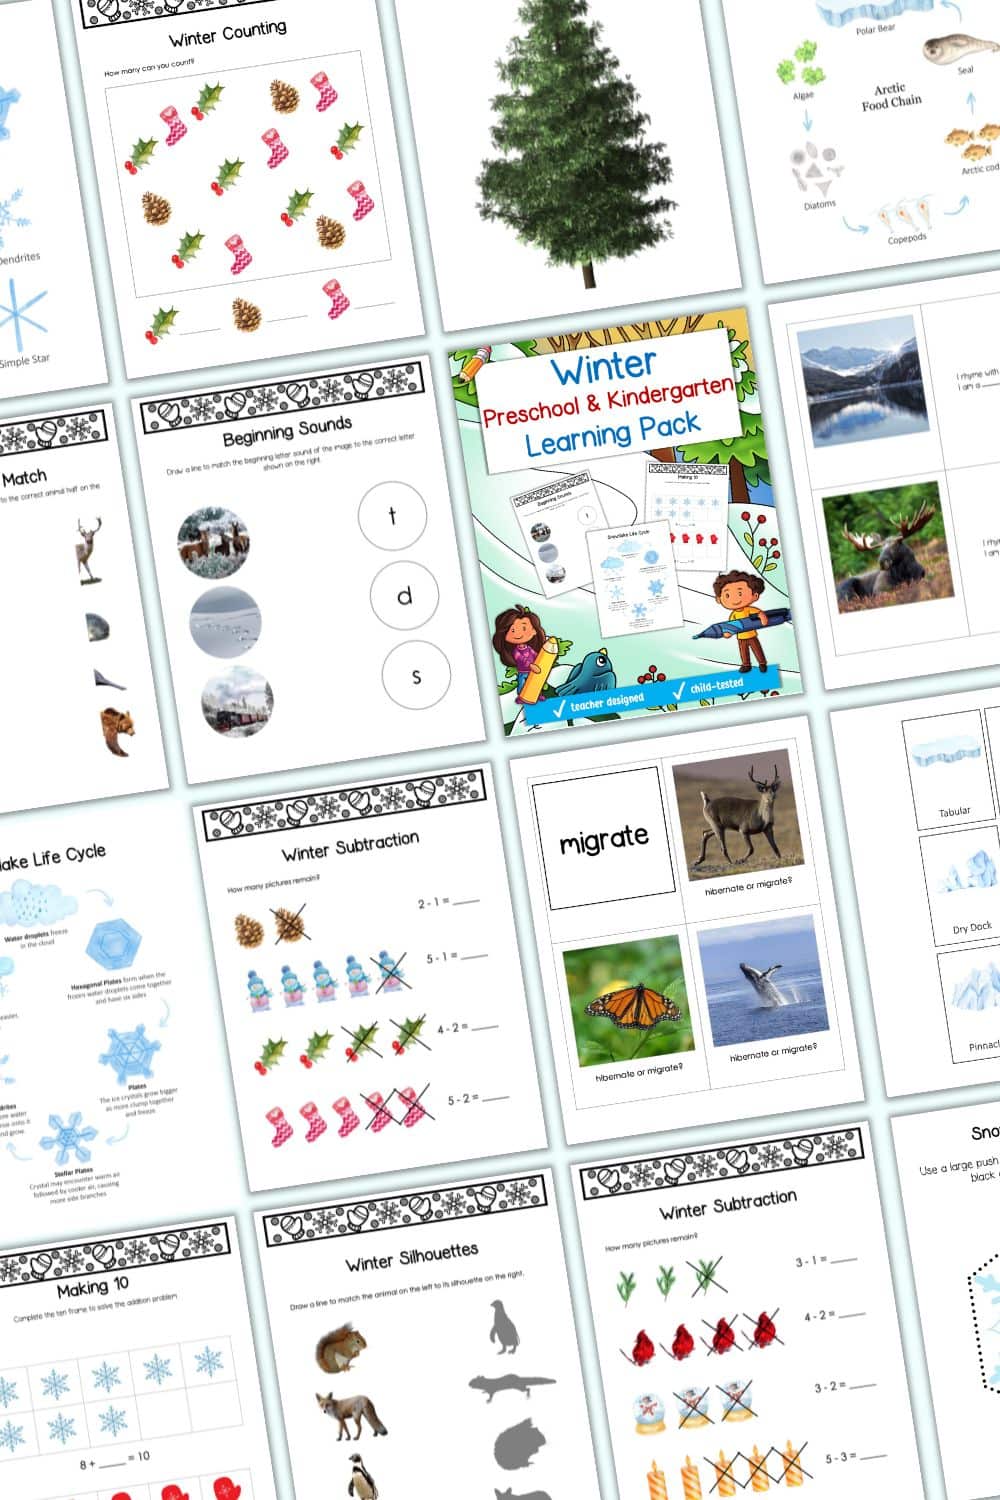 A preview of 16 pages of winter themed activities for prek and kindergarten students